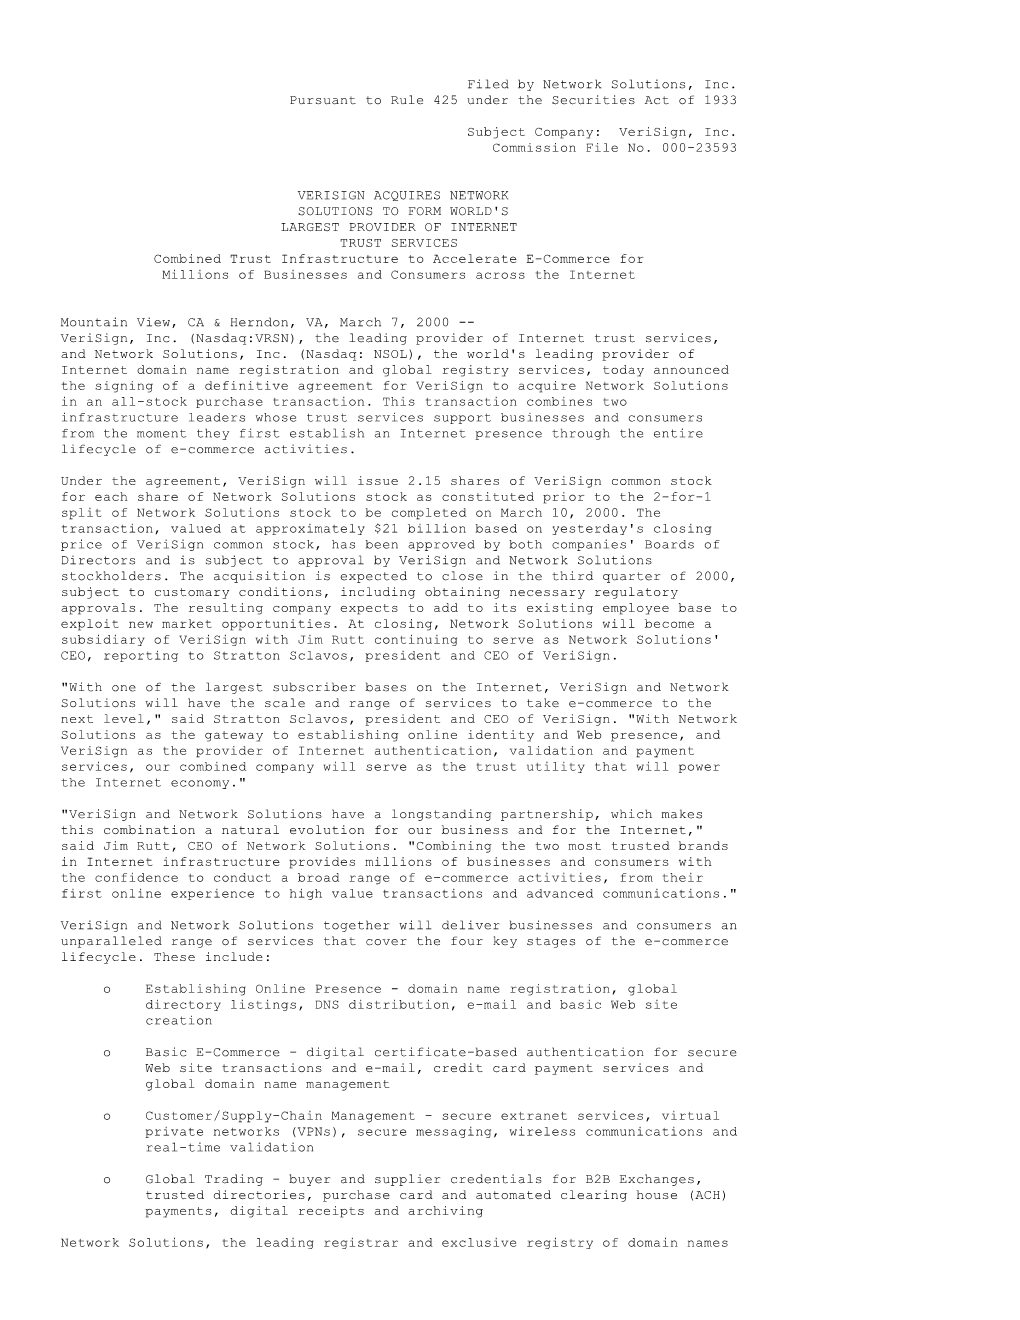 Filed by Network Solutions, Inc. Pursuant to Rule 425 Under the Securities Act of 1933